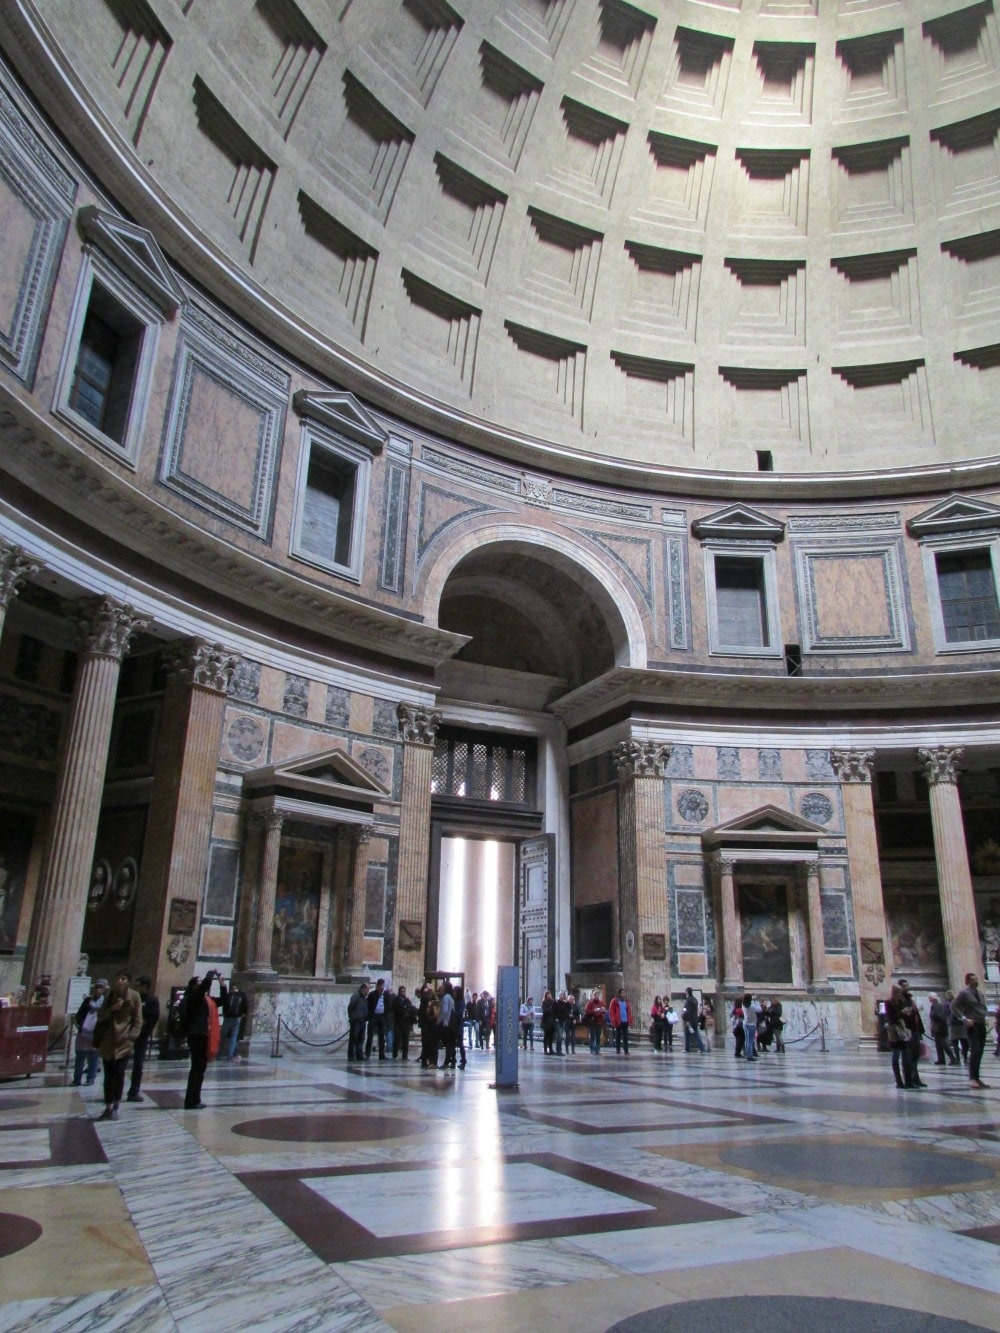 Rick Steves suggest going to attractions like the Pantheon in Rome during off hours